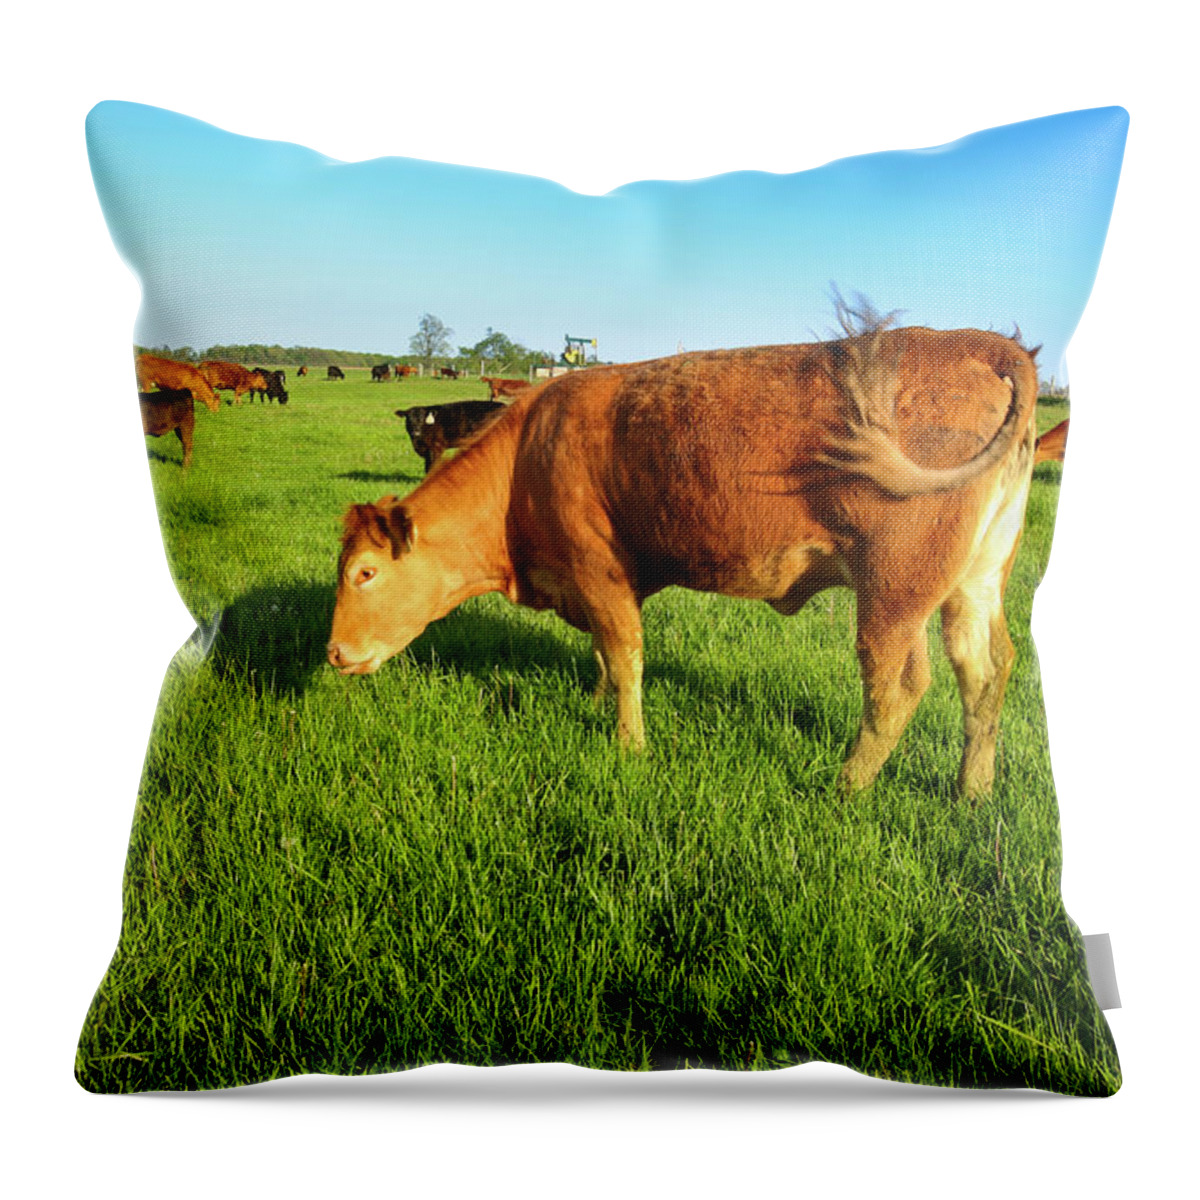 Grass Throw Pillow featuring the photograph Cattle Farm, Cows by Benedek